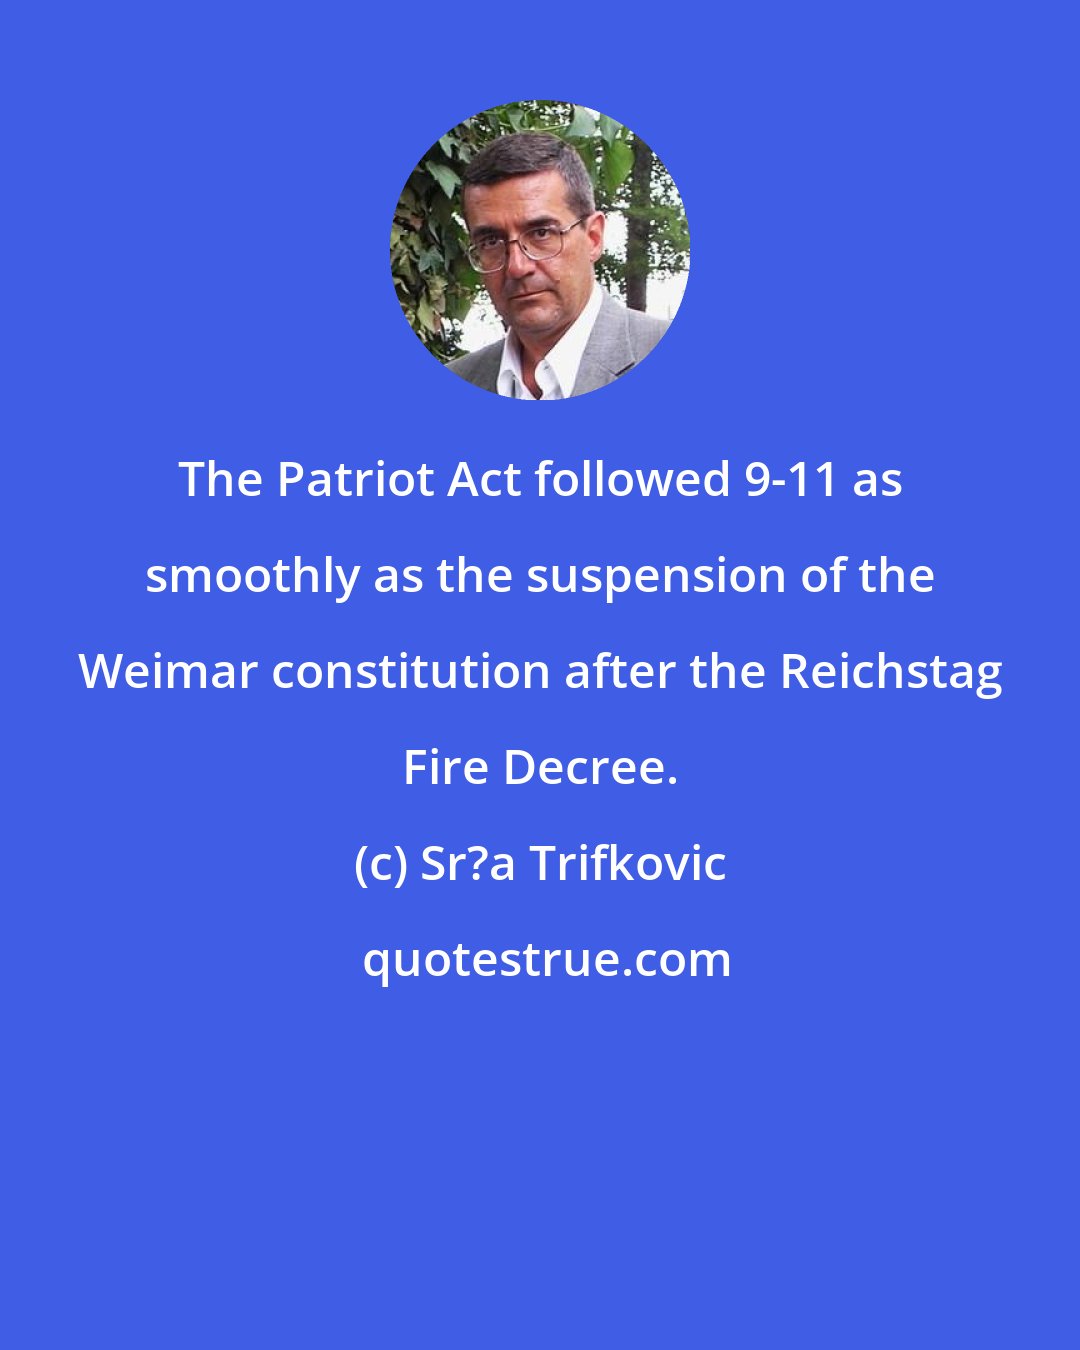 Sr?a Trifkovic: The Patriot Act followed 9-11 as smoothly as the suspension of the Weimar constitution after the Reichstag Fire Decree.